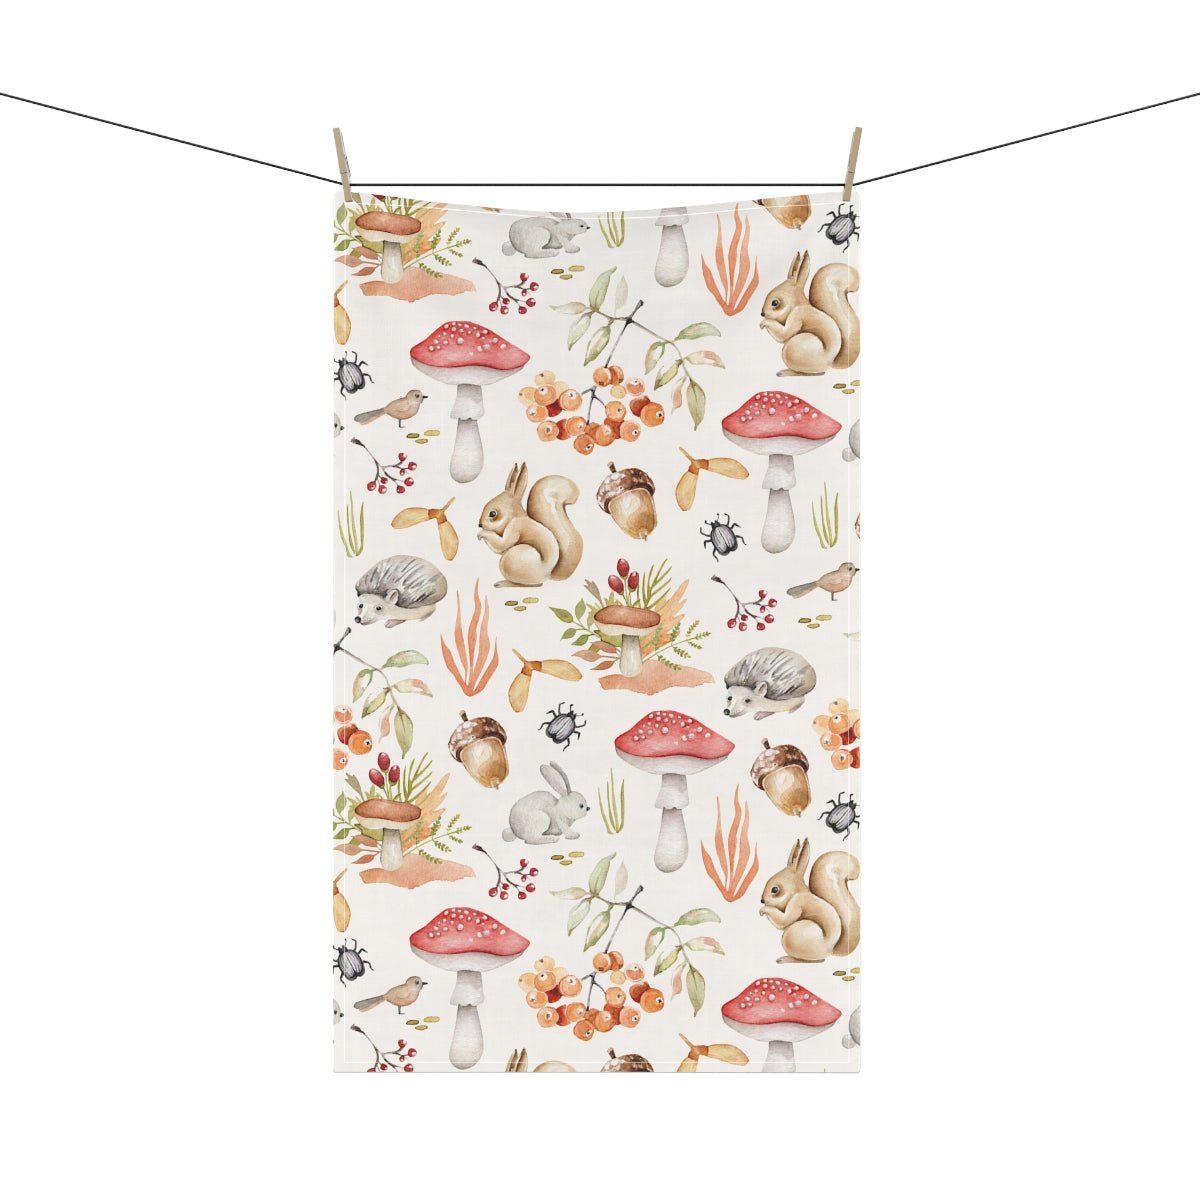 Fall Forest Animals Kitchen Towel - Puffin Lime